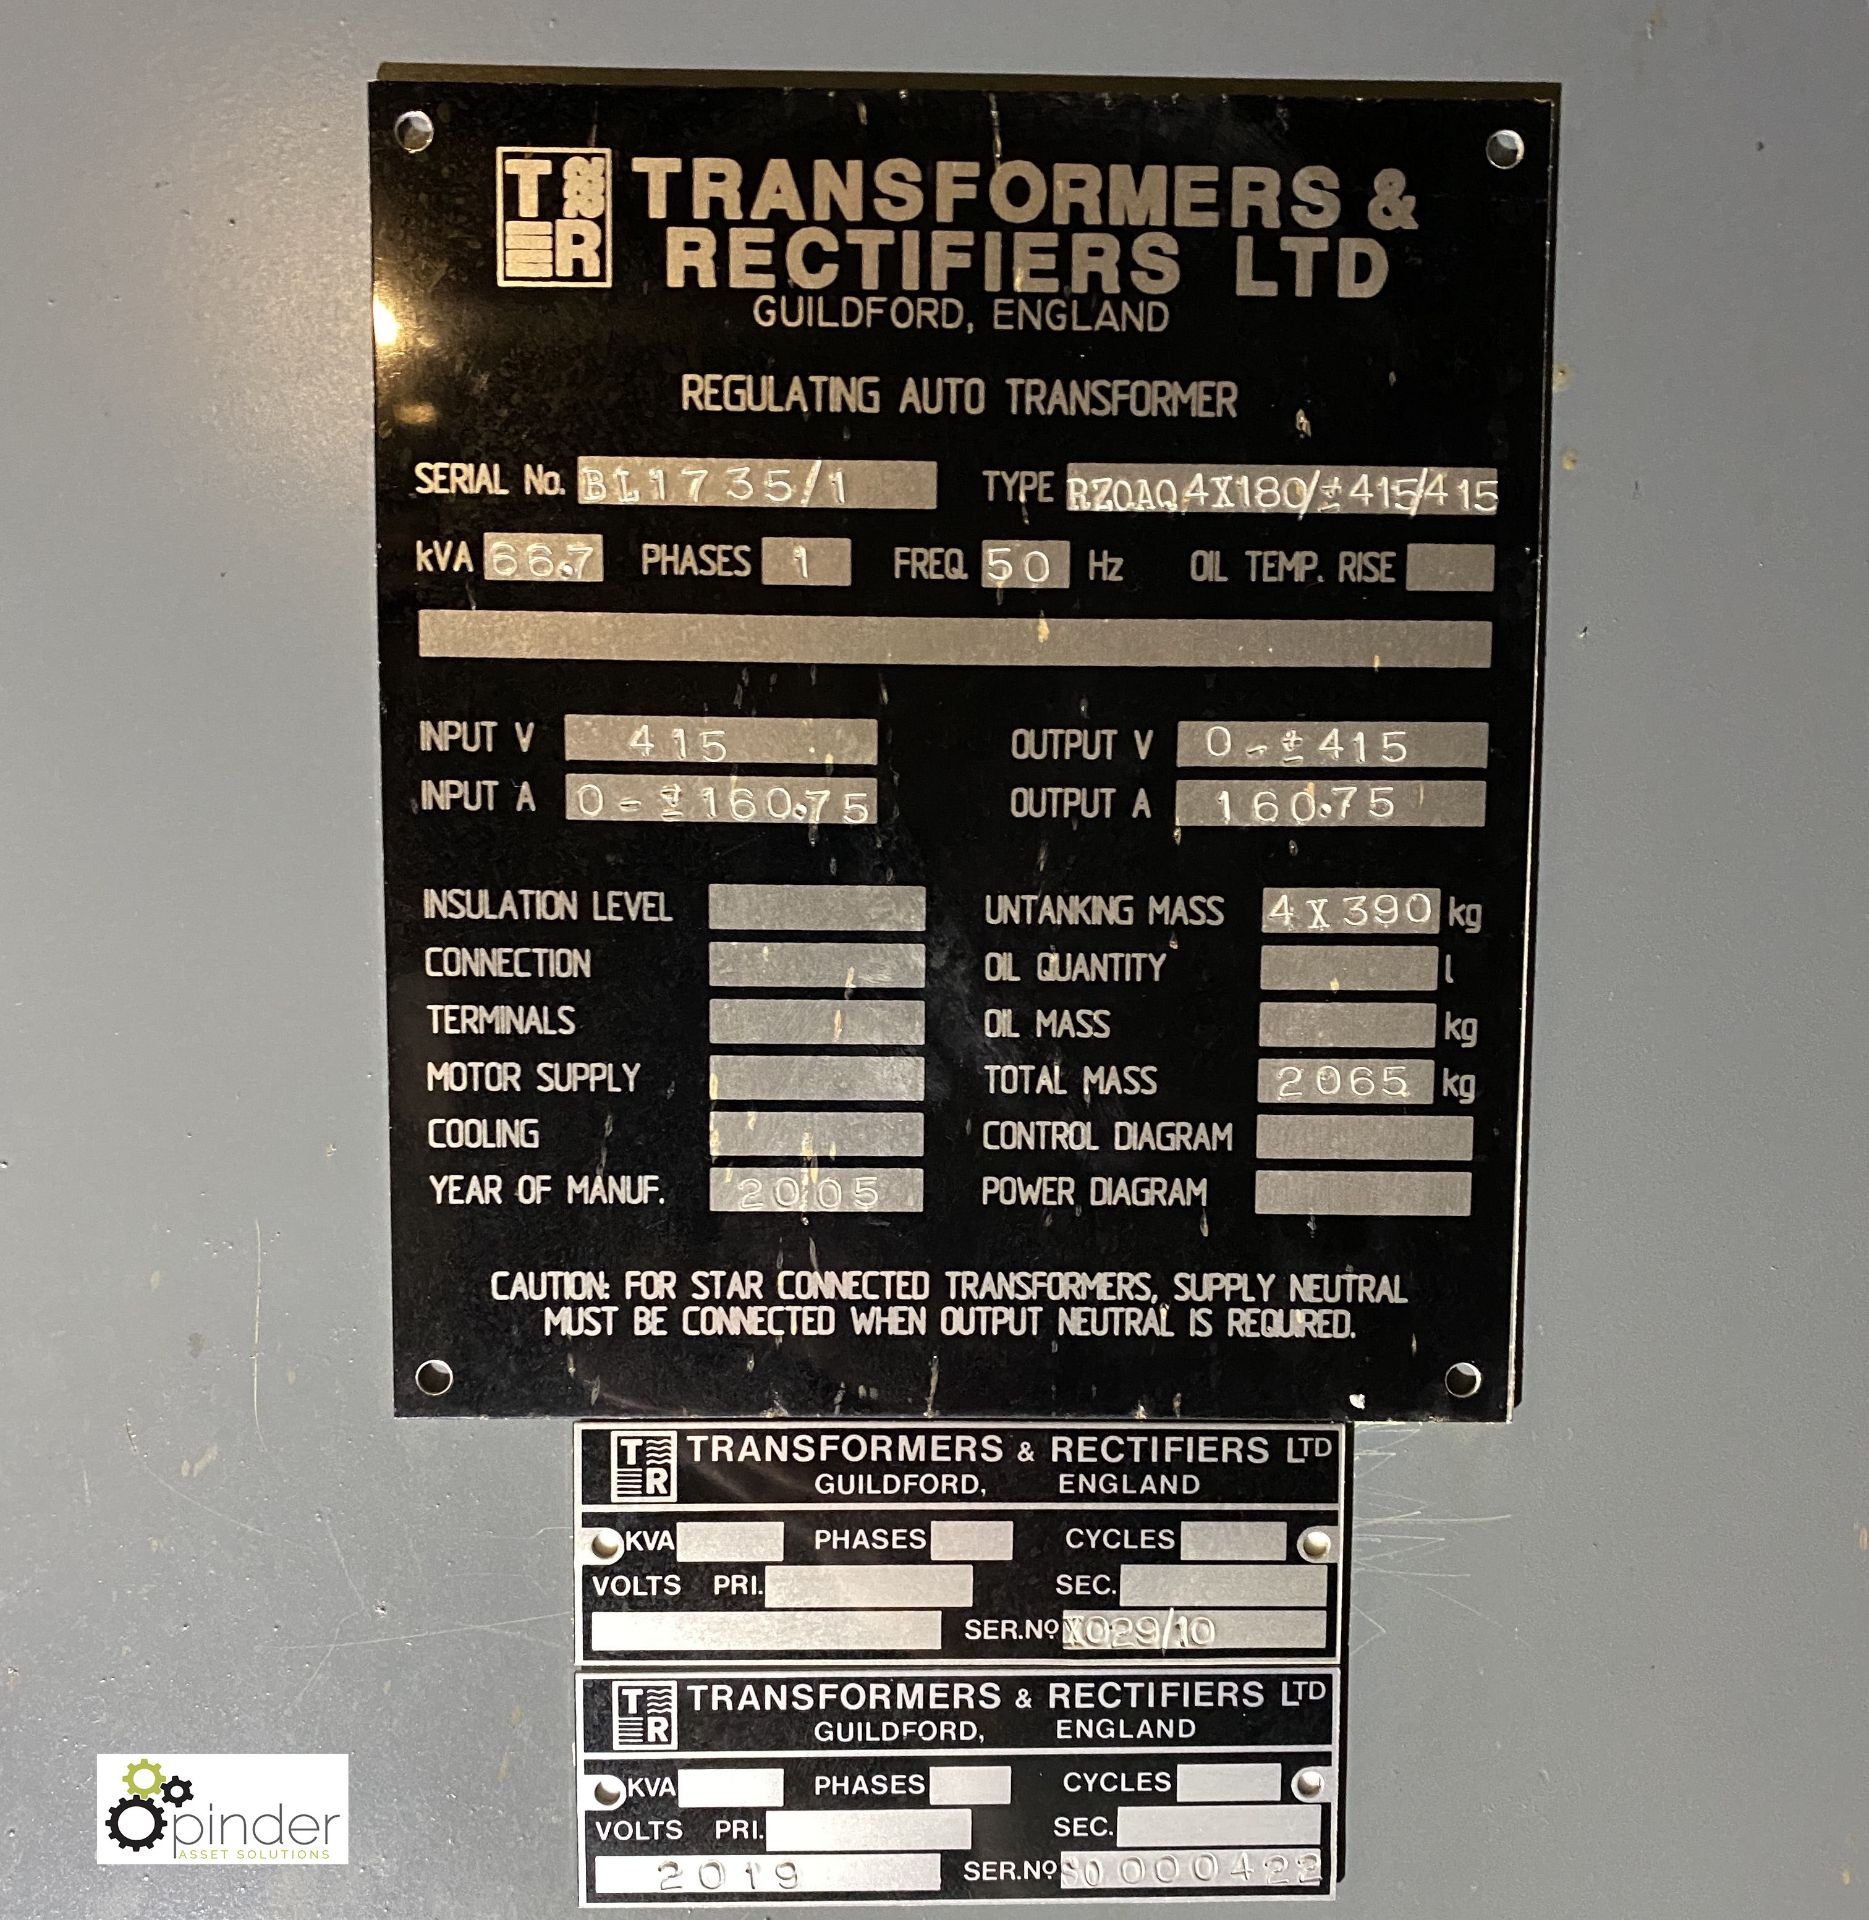 Transformers and Rectifiers Ltd RZOAQ 4X180/415/415 Regulating Auto Transformer, 66.7kva, phase 1, - Image 3 of 5